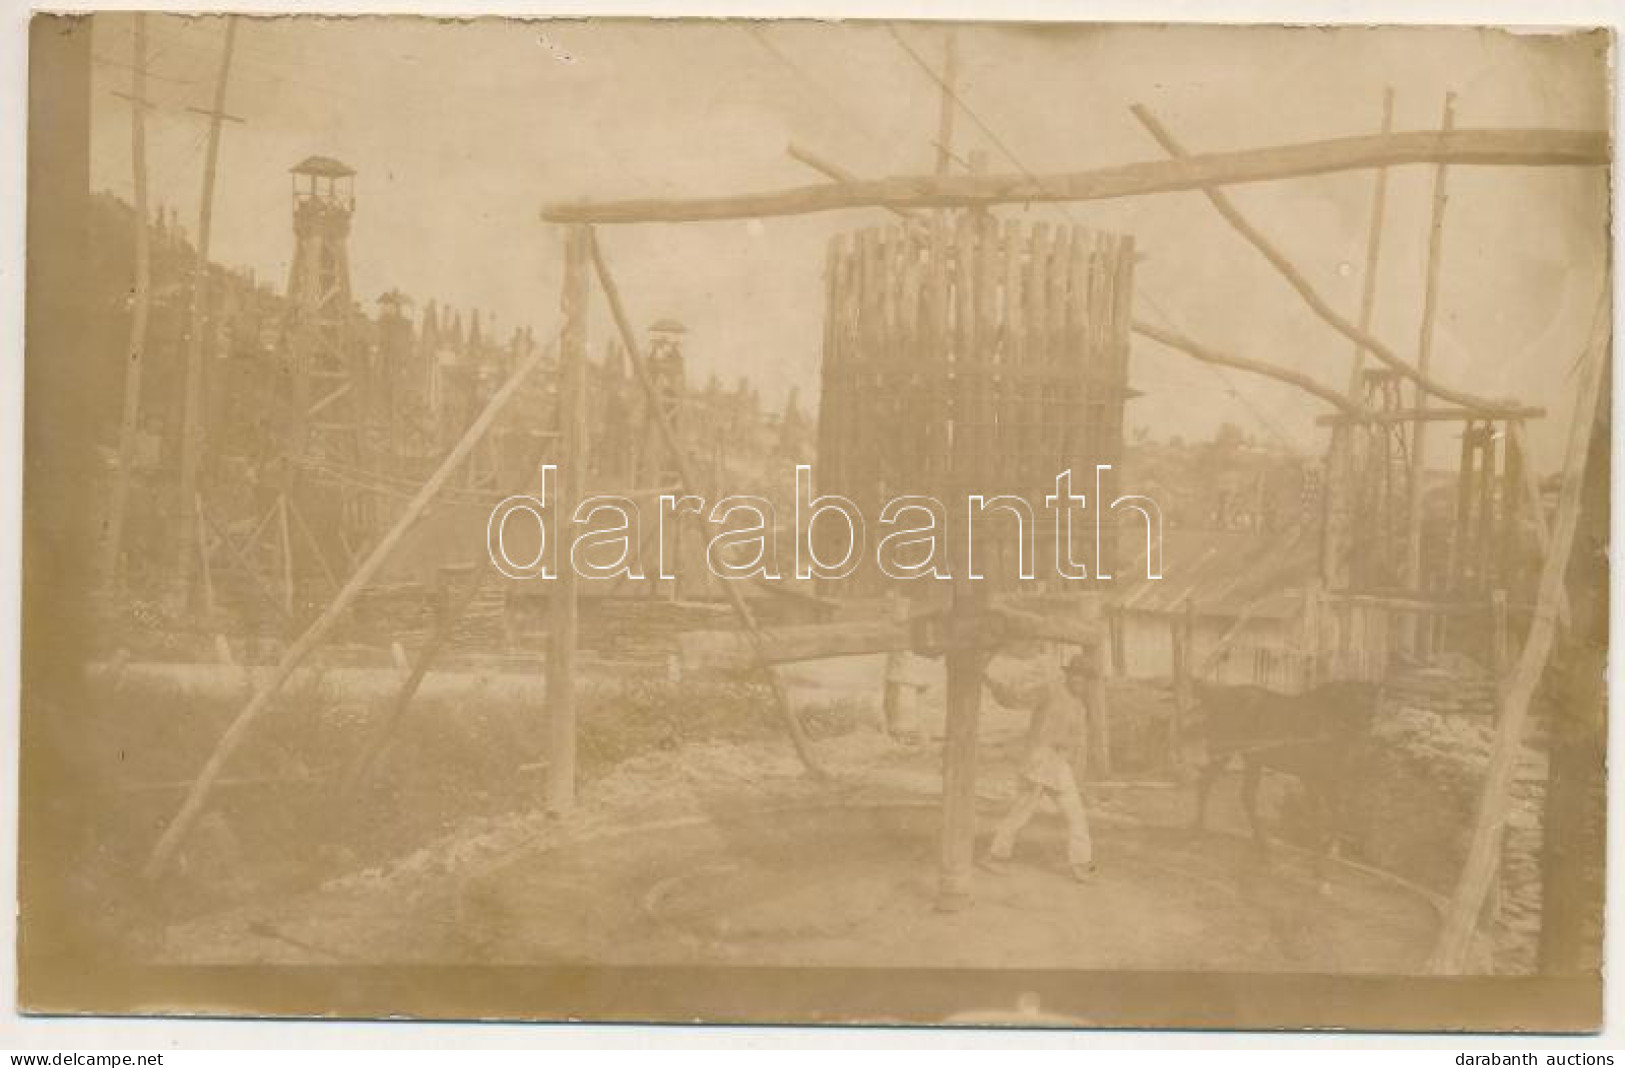 T2/T3 1915 Moreni, Petroleum Extraction, Oil Rigs. Photo (fl) - Ohne Zuordnung